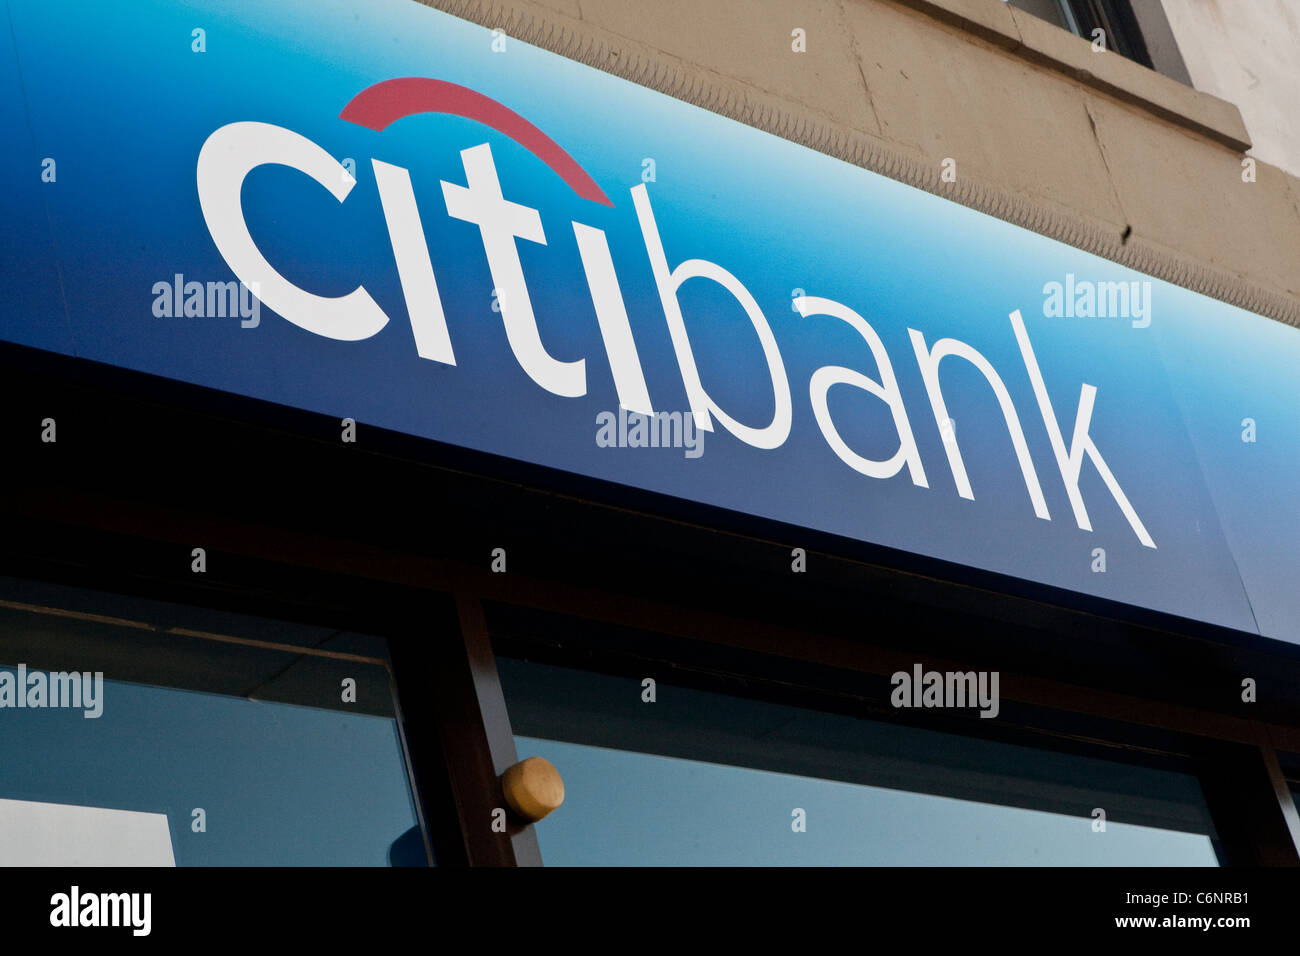 A Citibank branch is pictured in New York City, NY Monday August 1, 2011. Stock Photo